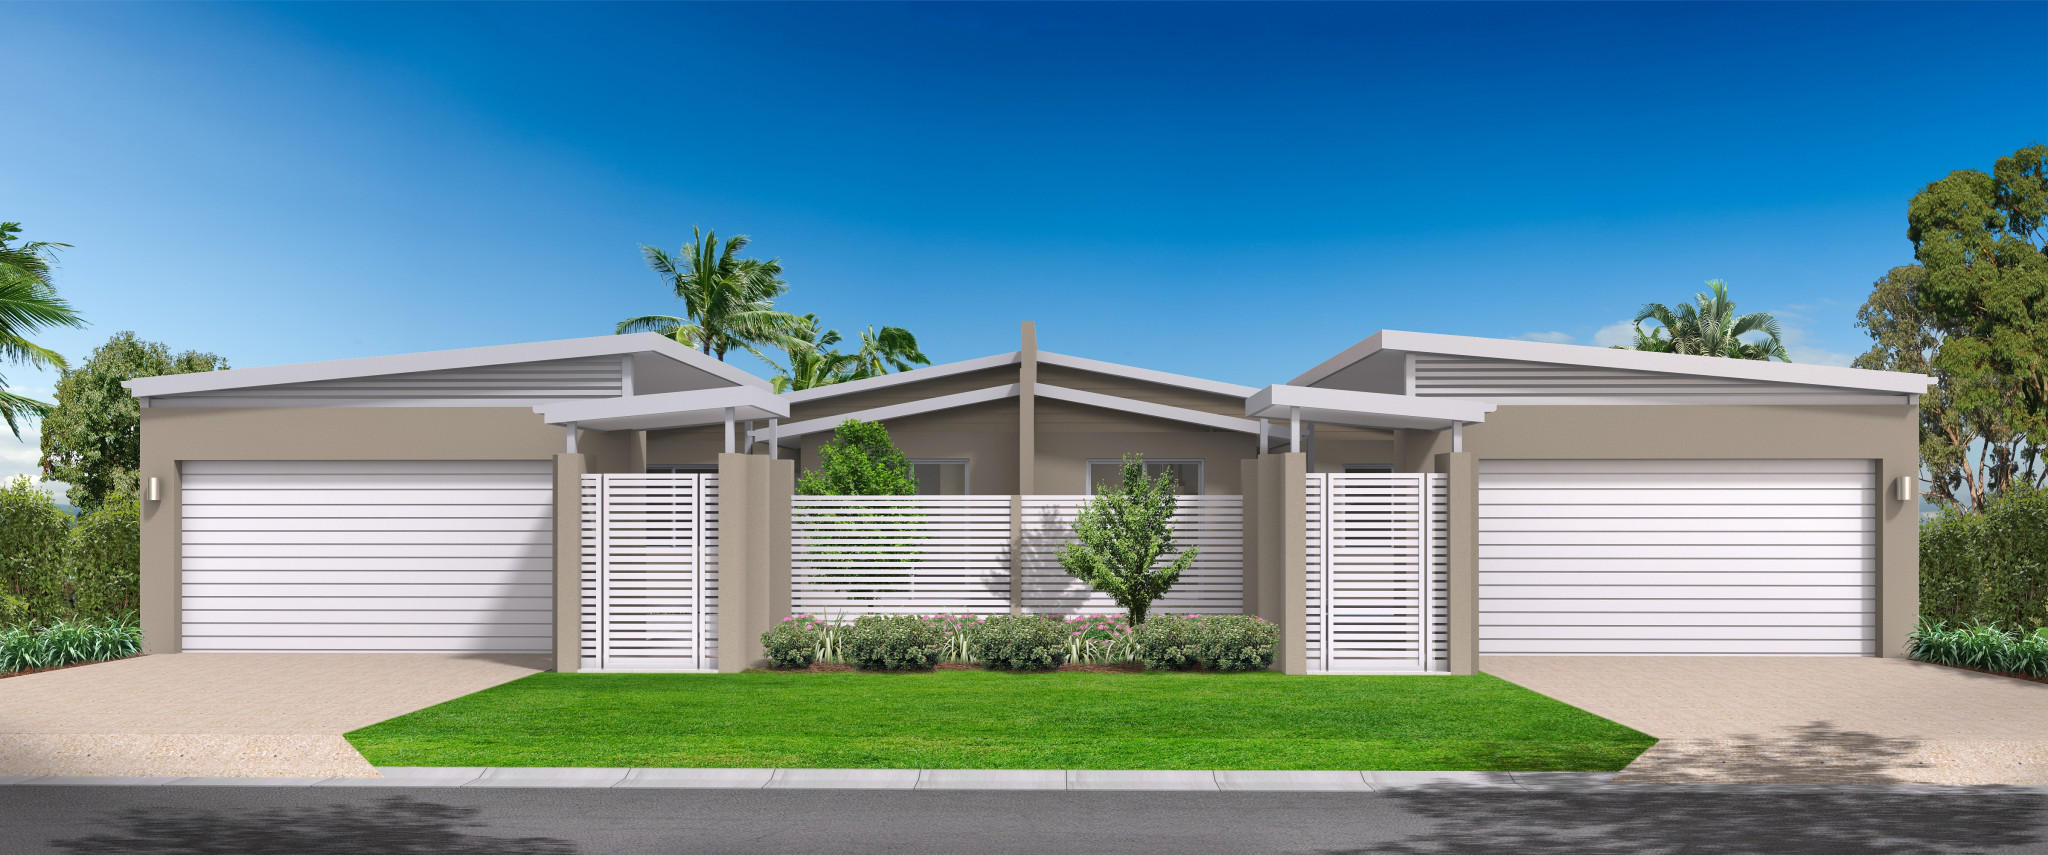 An artist’s impression of the villas developer Tom Hedley is considering for McLachlan St, Manunda. Picture: Supplied